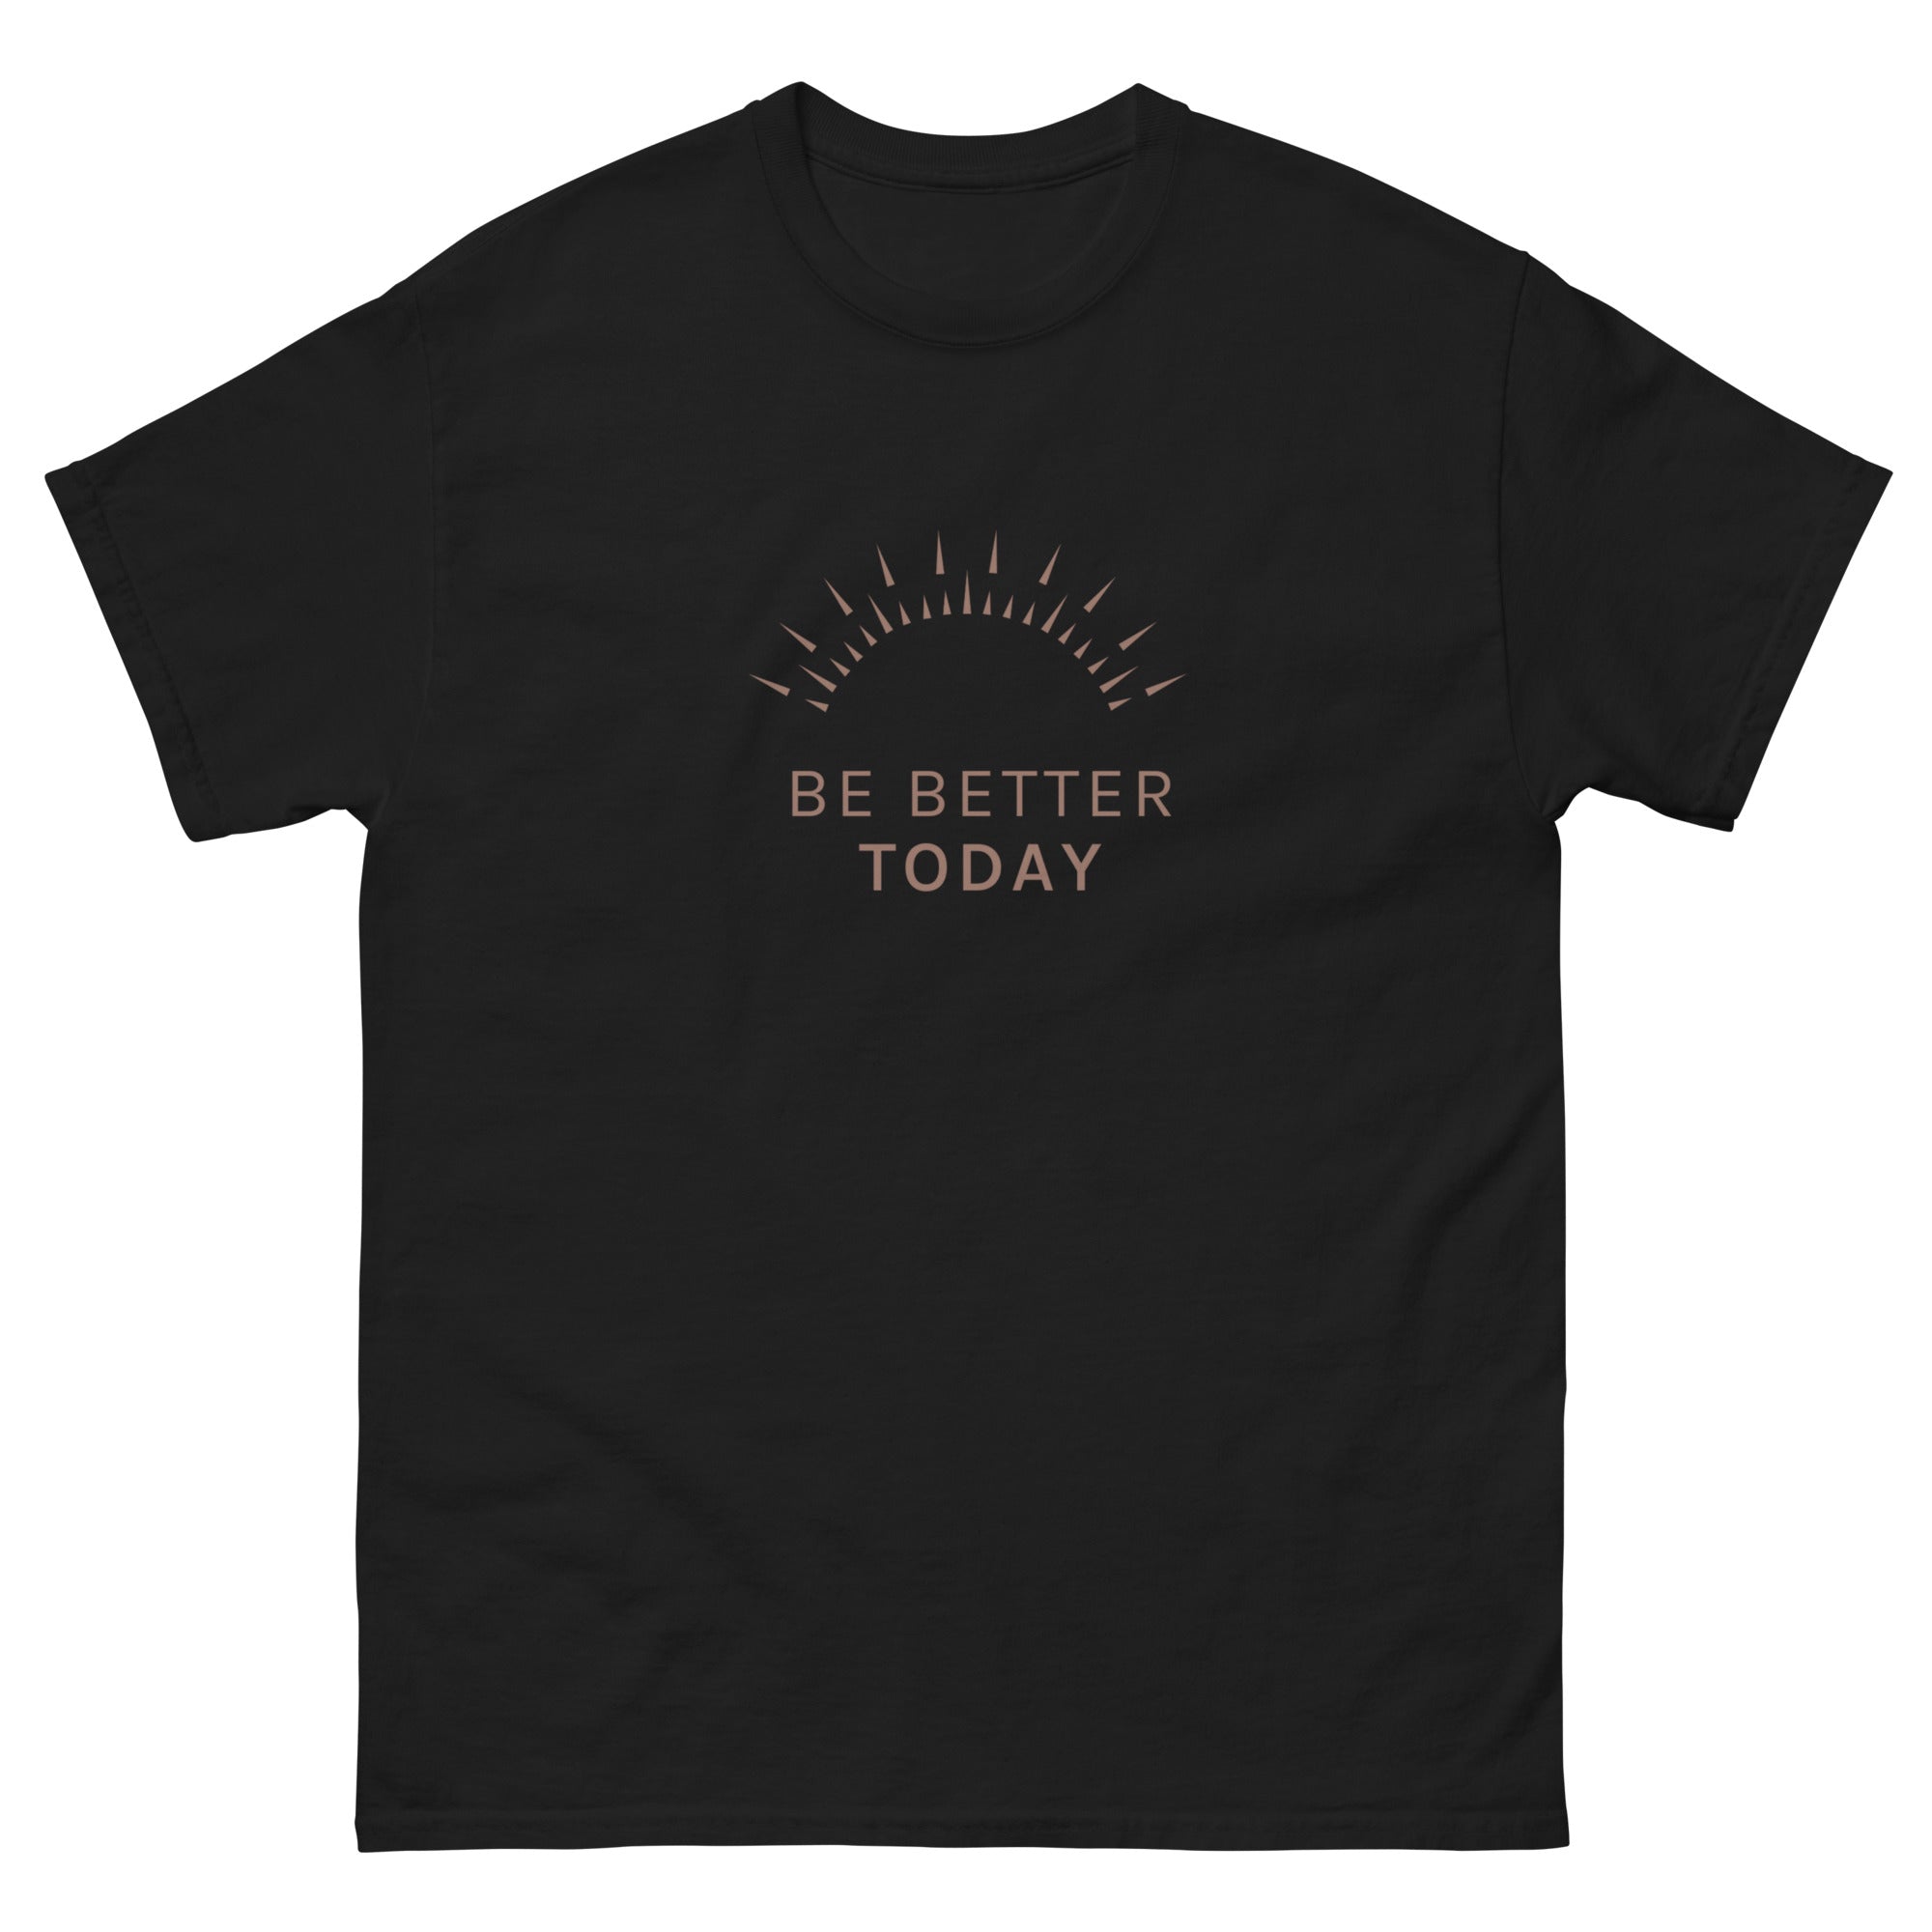 Be Better Today Tee